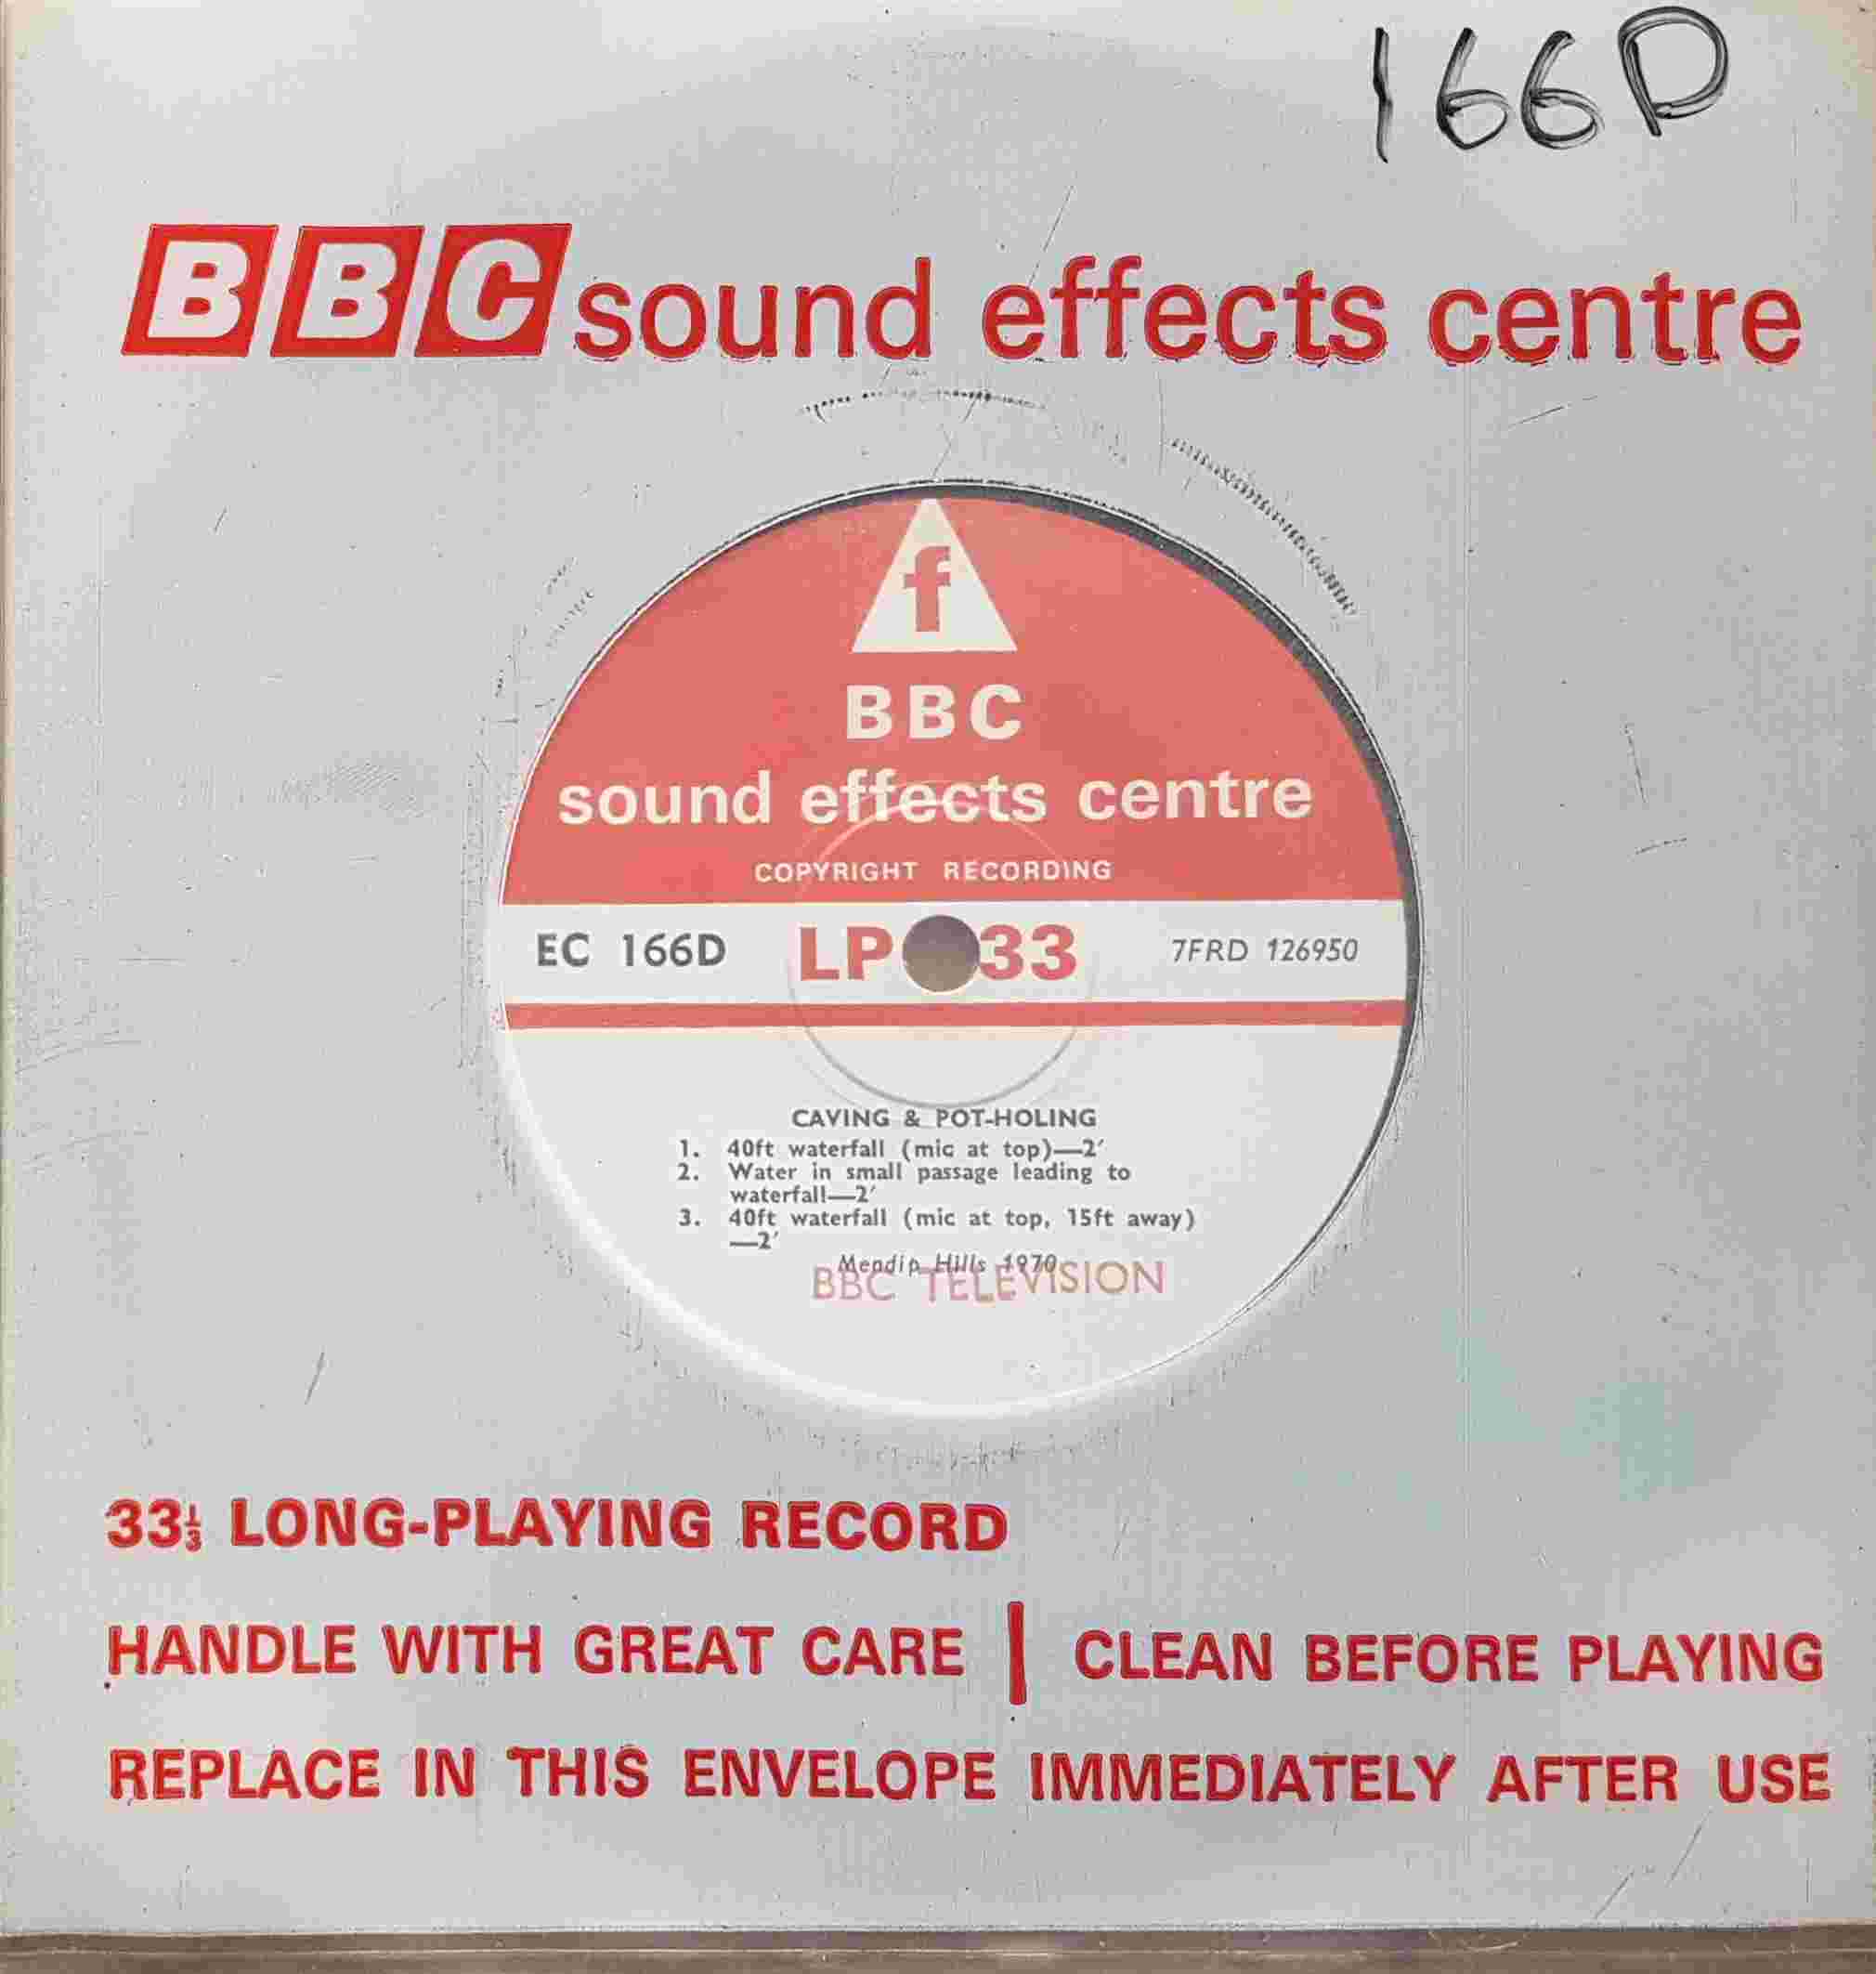 Picture of EC 166D Caving & pot-holing by artist Not registered from the BBC records and Tapes library